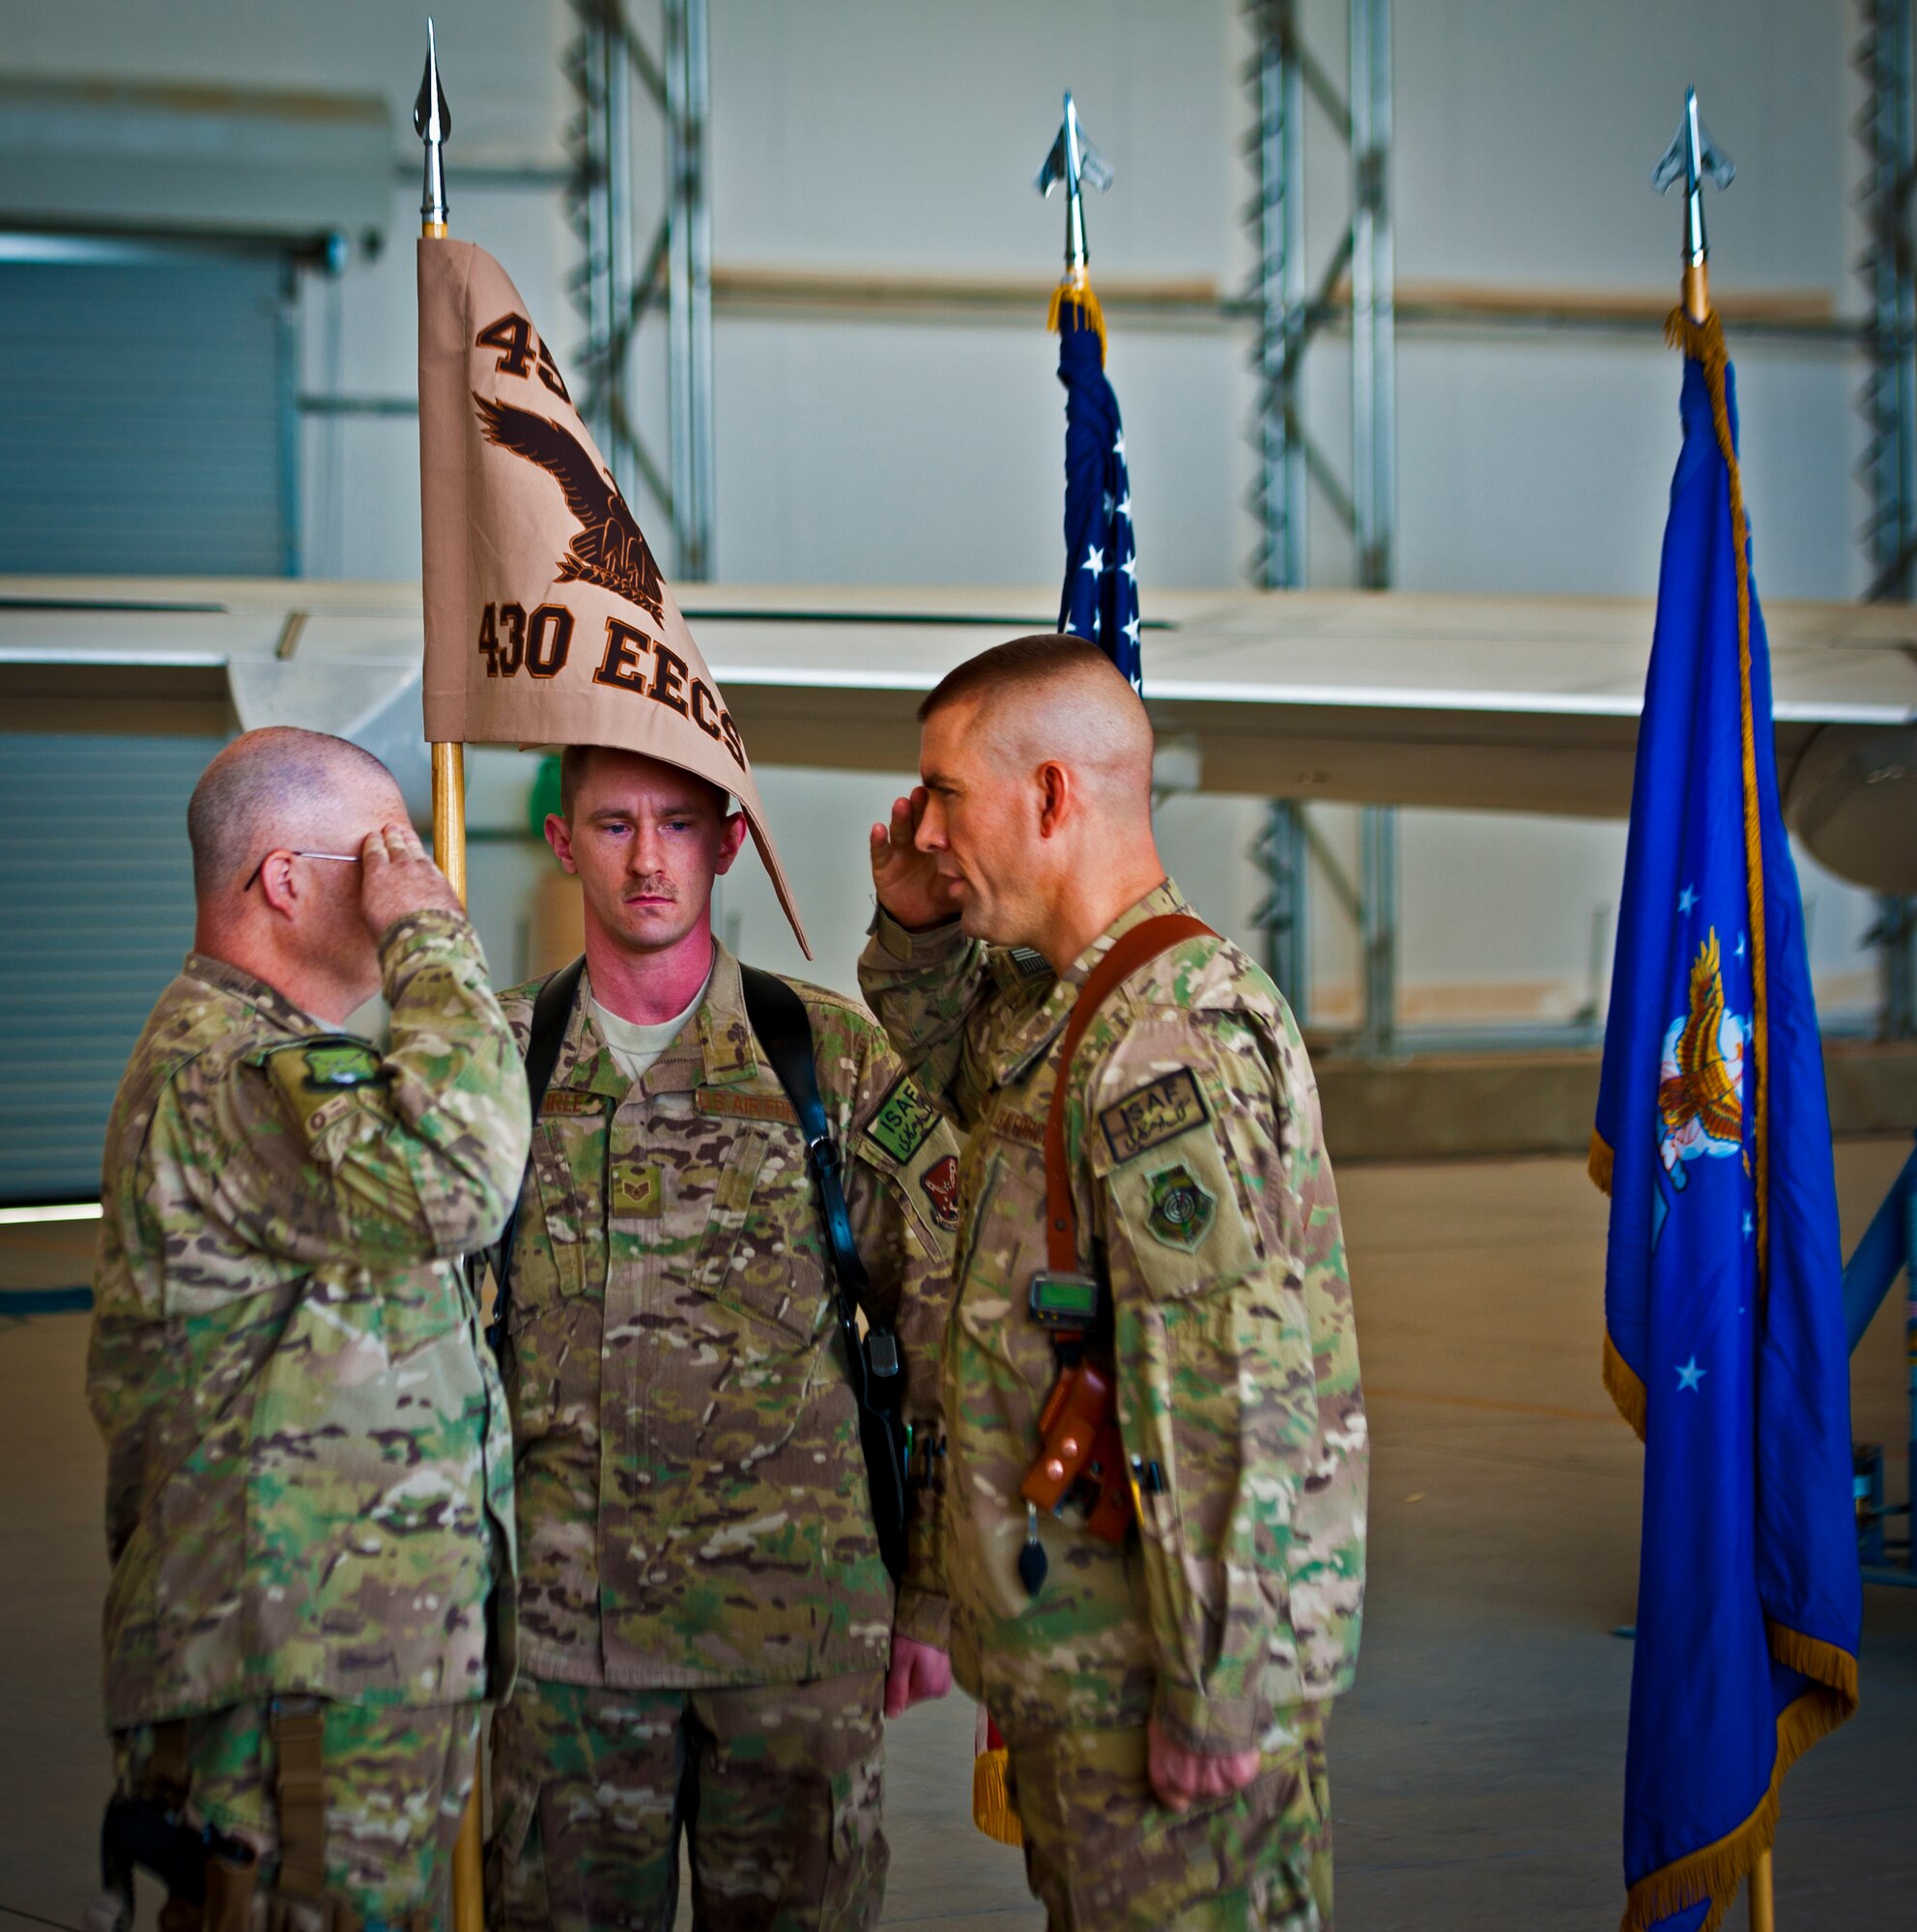 Chief Master Sgt. James Isom, 451st Expeditionary Operations Group superintendent, renders a salute to Col. Brook Leonard, 451st EOG commander, during an activation ceremony for the 430th Expeditionary Electronic Combat Squadron, at Kandahar Airfield, March 13, 2013. The unit, which flies the E-11A, was previously designated as the 451st Tactical Airborne Gateway. (U.S. Air Force photo/Senior Airman Scott Saldukas)